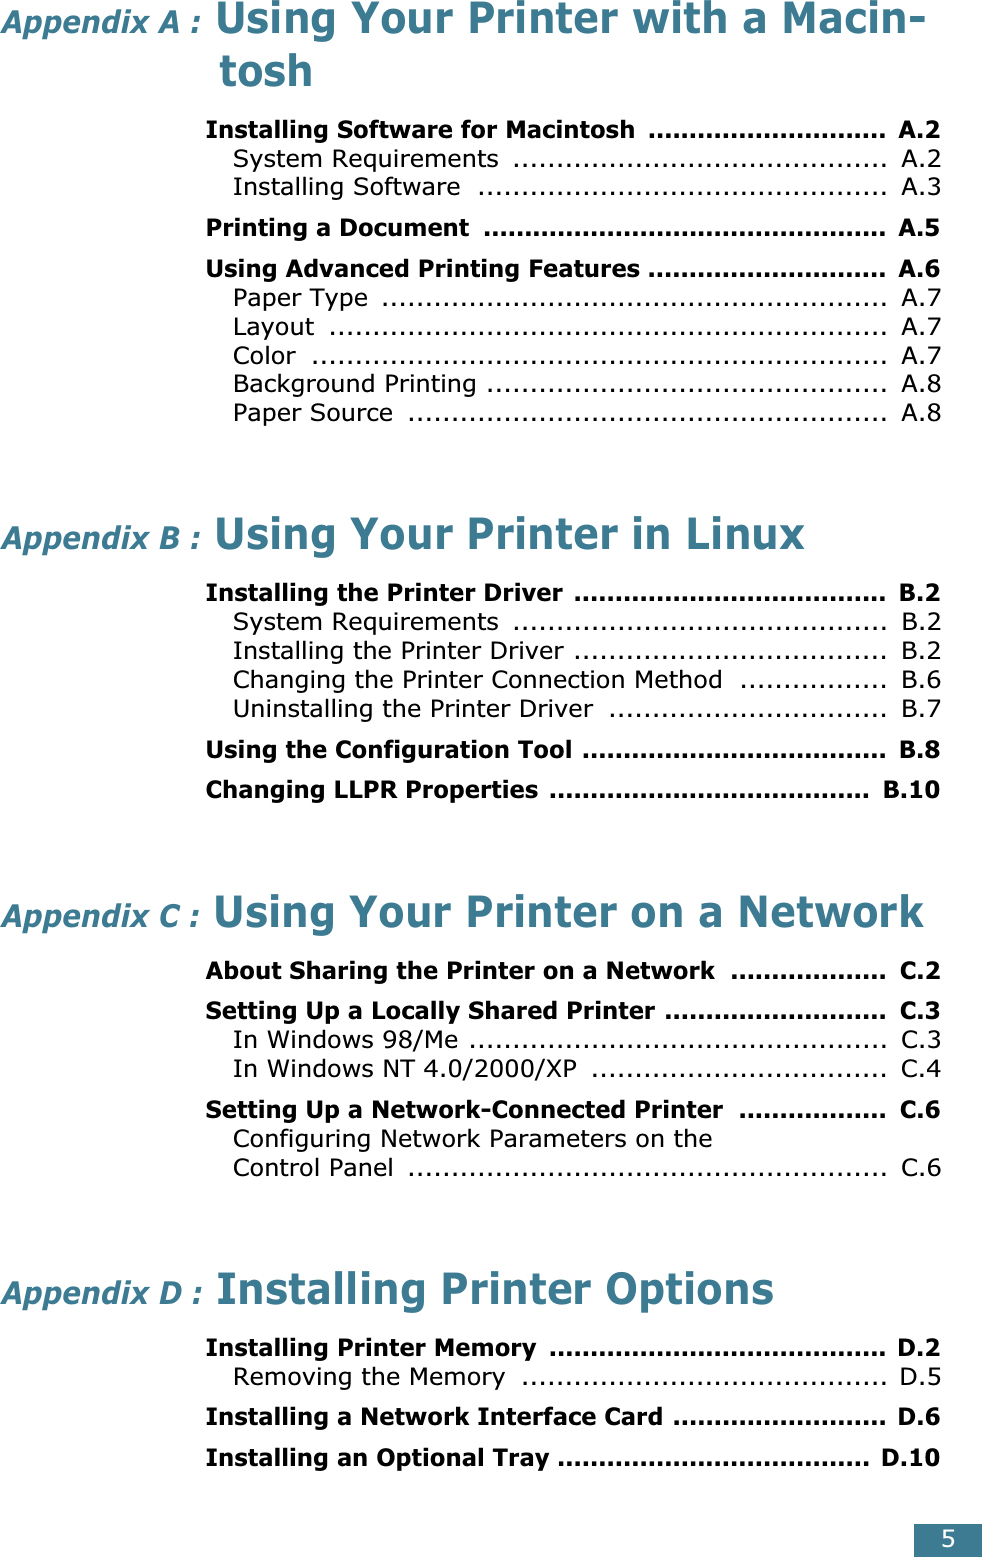  5 Appendix A :  Using Your Printer with a Macin-tosh Installing Software for Macintosh  .............................  A.2 System Requirements  ...........................................  A.2Installing Software  ...............................................  A.3 Printing a Document  .................................................  A.5Using Advanced Printing Features .............................  A.6 Paper Type  ..........................................................  A.7Layout ................................................................  A.7Color ..................................................................  A.7Background Printing ..............................................  A.8Paper Source  .......................................................  A.8 Appendix B :  Using Your Printer in Linux Installing the Printer Driver  ......................................  B.2 System Requirements  ...........................................  B.2Installing the Printer Driver ....................................  B.2Changing the Printer Connection Method  .................  B.6Uninstalling the Printer Driver  ................................  B.7 Using the Configuration Tool .....................................  B.8Changing LLPR Properties  .......................................  B.10 Appendix C :  Using Your Printer on a Network About Sharing the Printer on a Network  ...................  C.2Setting Up a Locally Shared Printer ...........................  C.3 In Windows 98/Me ................................................  C.3In Windows NT 4.0/2000/XP  ..................................  C.4 Setting Up a Network-Connected Printer  ..................  C.6 Configuring Network Parameters on theControl Panel  .......................................................  C.6 Appendix D :  Installing Printer Options Installing Printer Memory  ......................................... D.2 Removing the Memory  .......................................... D.5 Installing a Network Interface Card ..........................  D.6Installing an Optional Tray ...................................... D.10